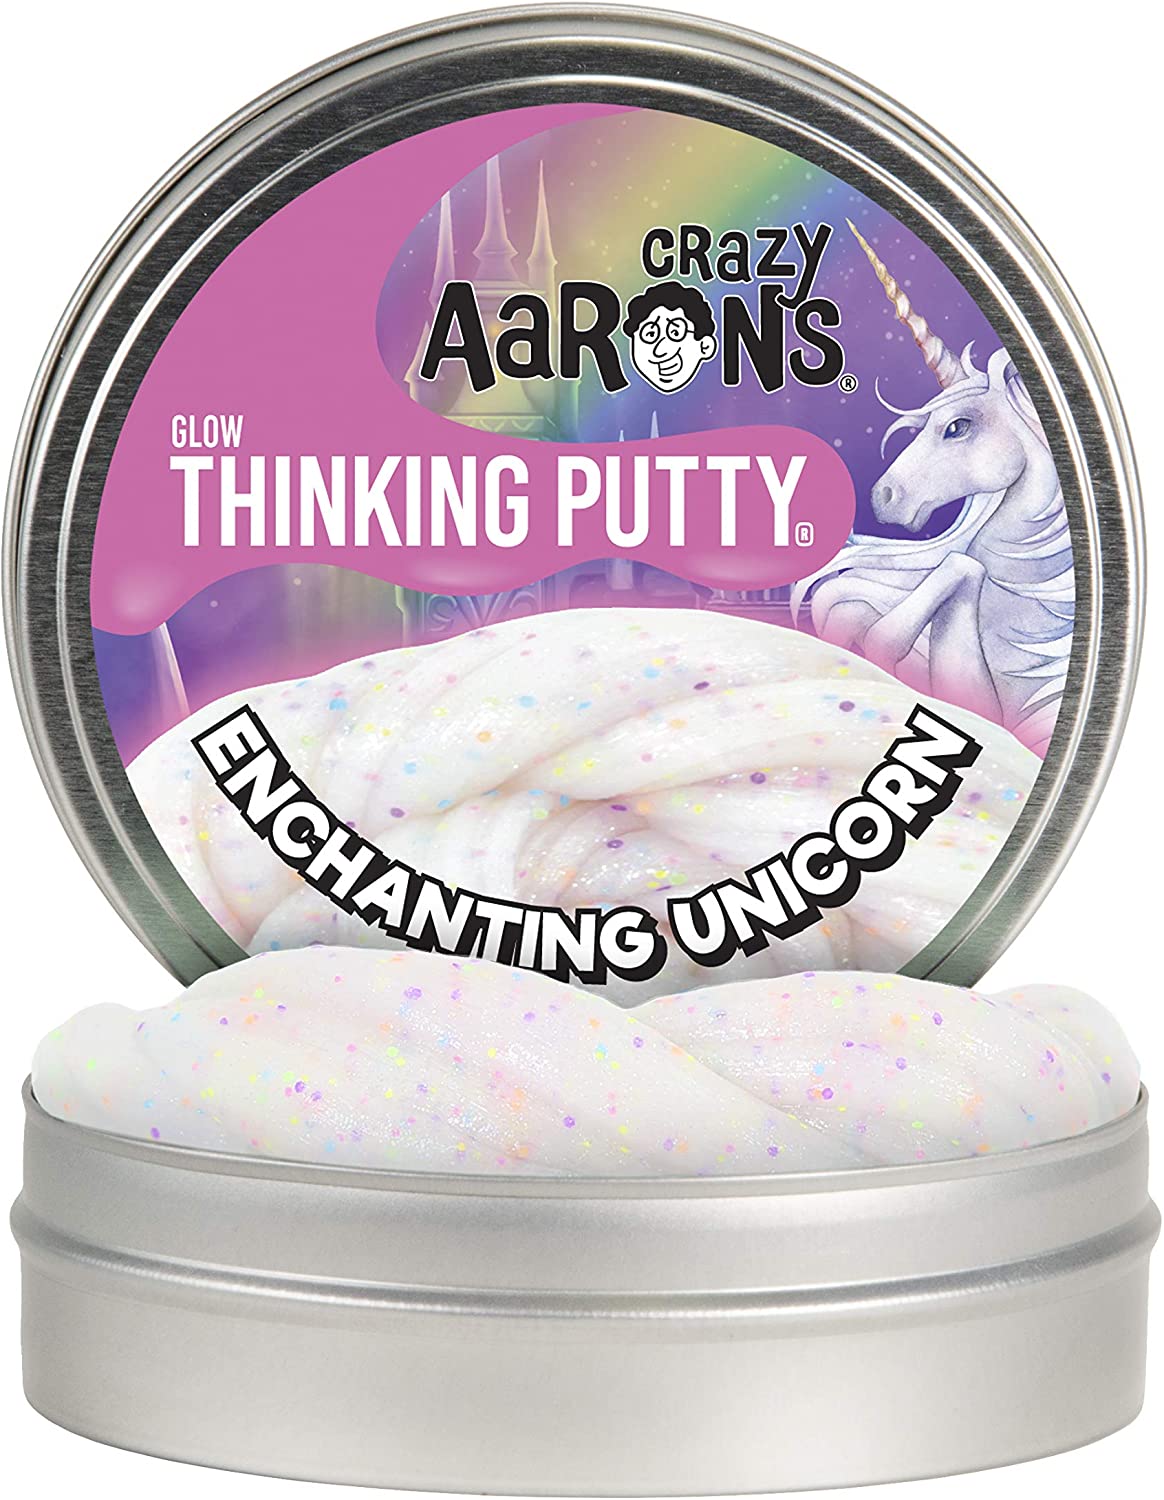 Enchanting Unicorn Putty 4” Tin Thinking Putty by Crazy Aaron’s